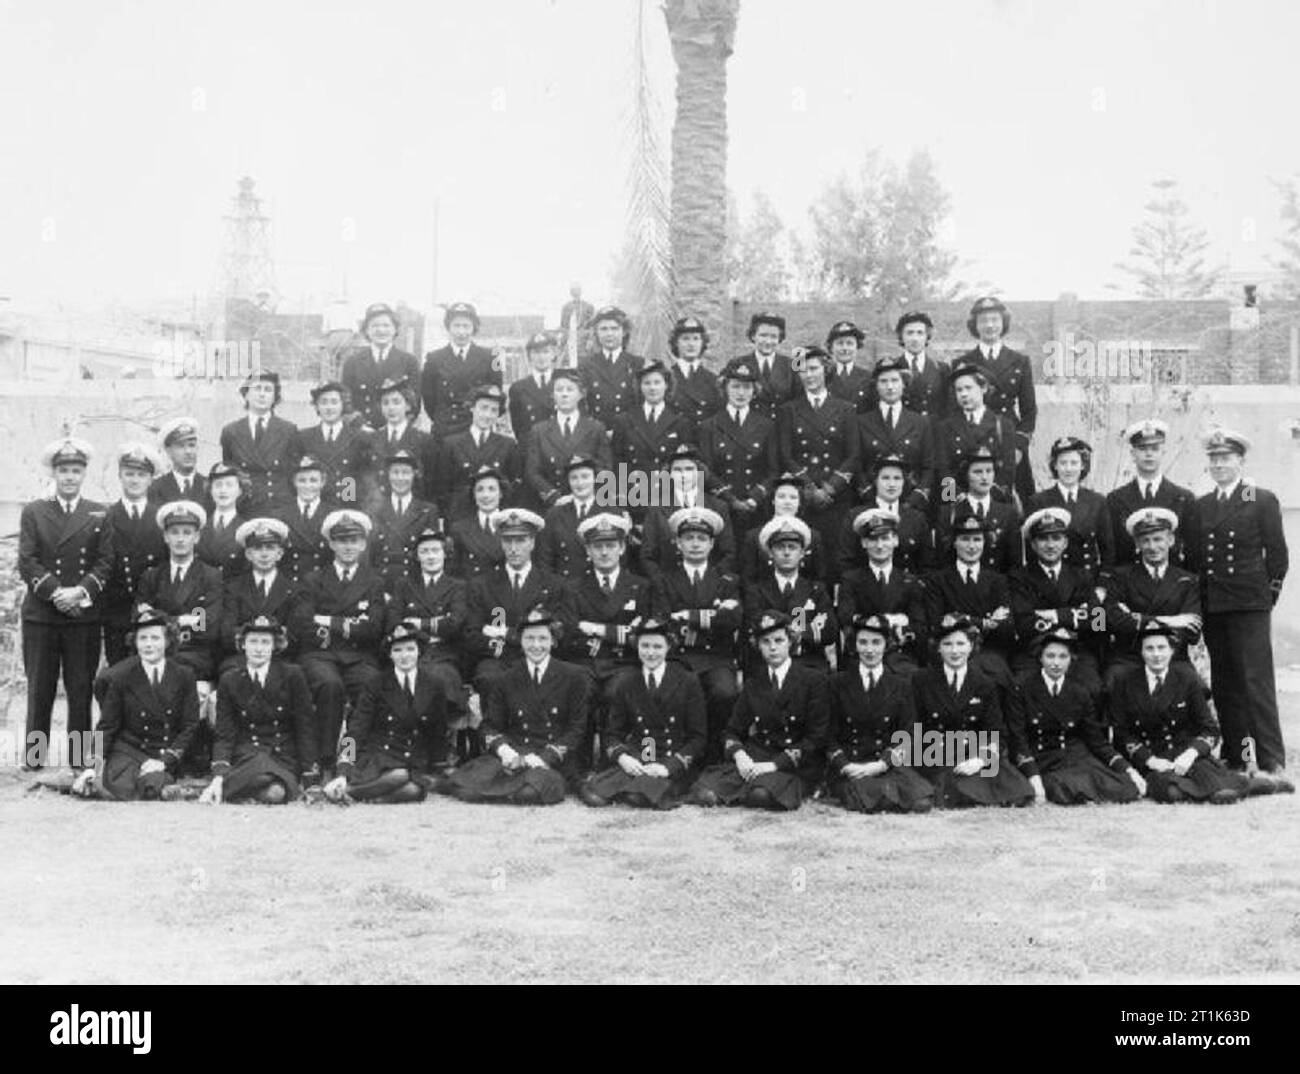 Naval Communications Staff at Alexandria. May 1944, Levant and Eastern Mediterranean Communications Staff. Left to right: Back row: Second Officer WRNS Palmer; Third Officers WRNS: Harrison, Whitelaw, Dilks, McGuire, McKinley. Second Officer WRNS Darrell, Third Officers WRNS: Owen, Clevedon. Fourth row: Third Officers WRNS: Glendinning, Roper, Busby, Hamilton, Seymour, Ward, Hodgson, Beith, Corbett, Patterson. Third row, Mr Porter, Warrant Telegraphist, RN; Sub Lieutenants, RNVR, Trundle, Chapman; Third Officers WRNS, Hind, Courage, Shipley, Foster; Second Officer WRNS Cameron; Third Officers Stock Photo